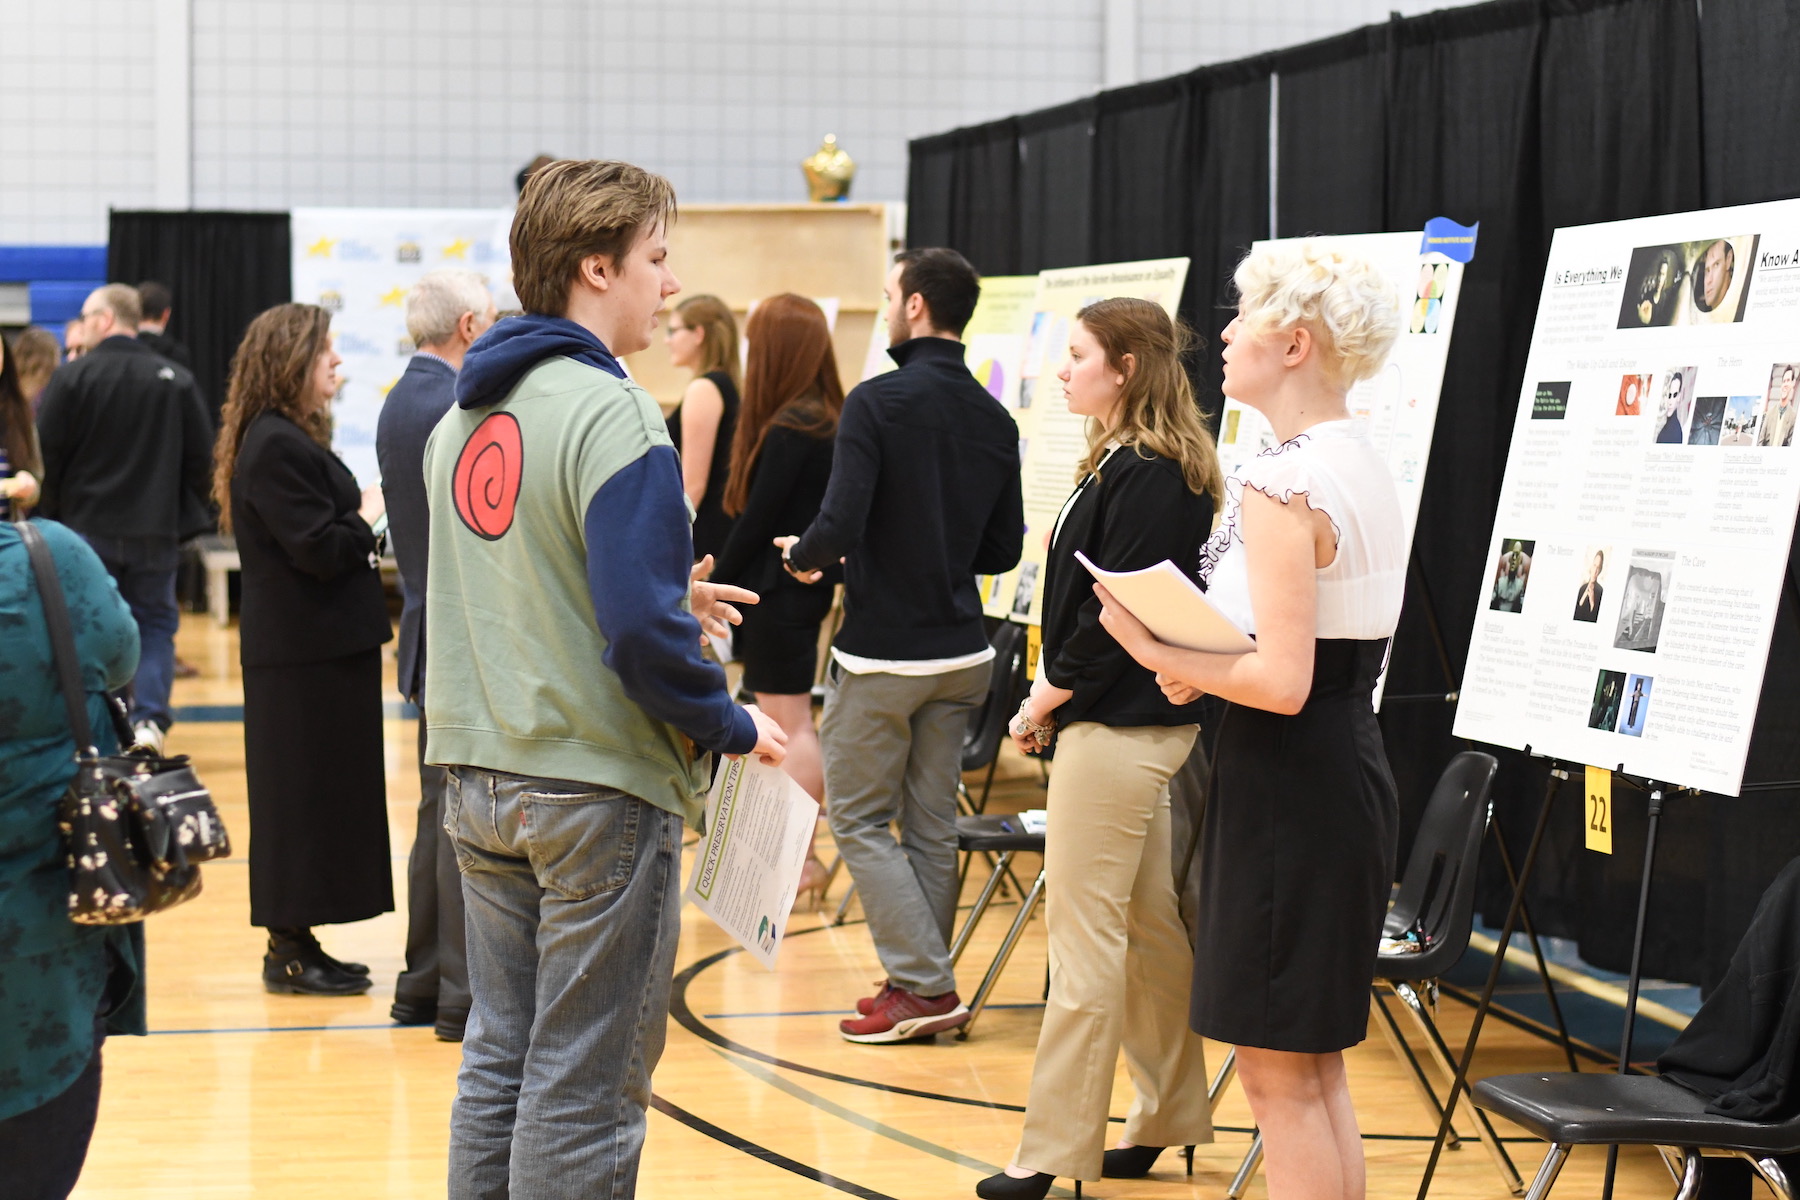 Students present projects as part of the 2019 NCCC Student Showcase.